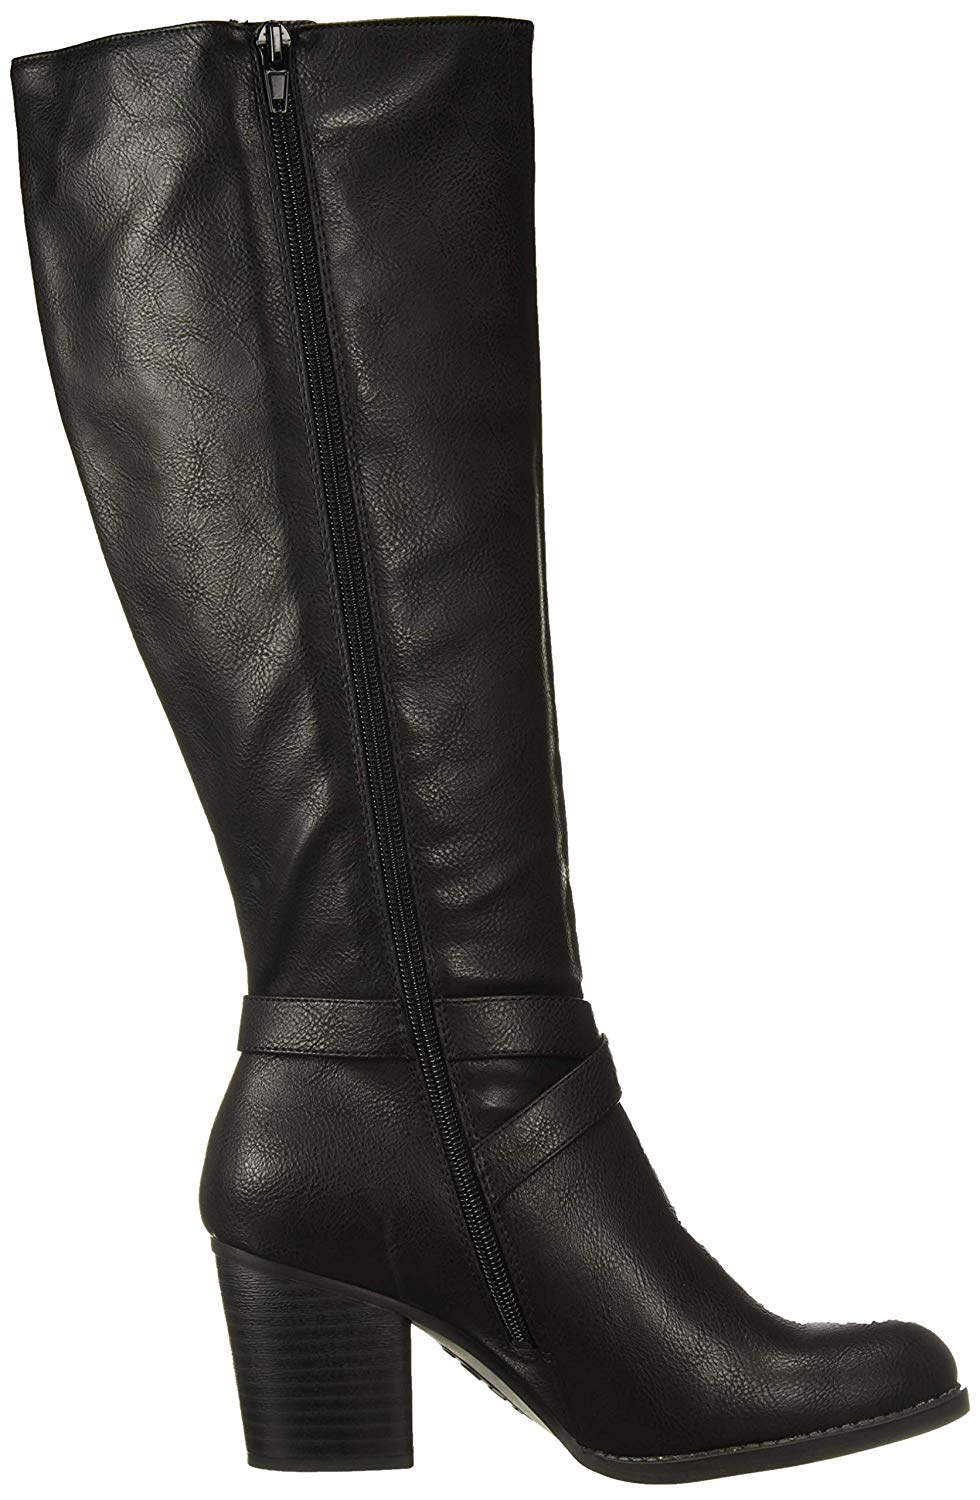 SOUL Naturalizer Women's Timber Knee High Boot, Black Wc, Size 10.0 ...